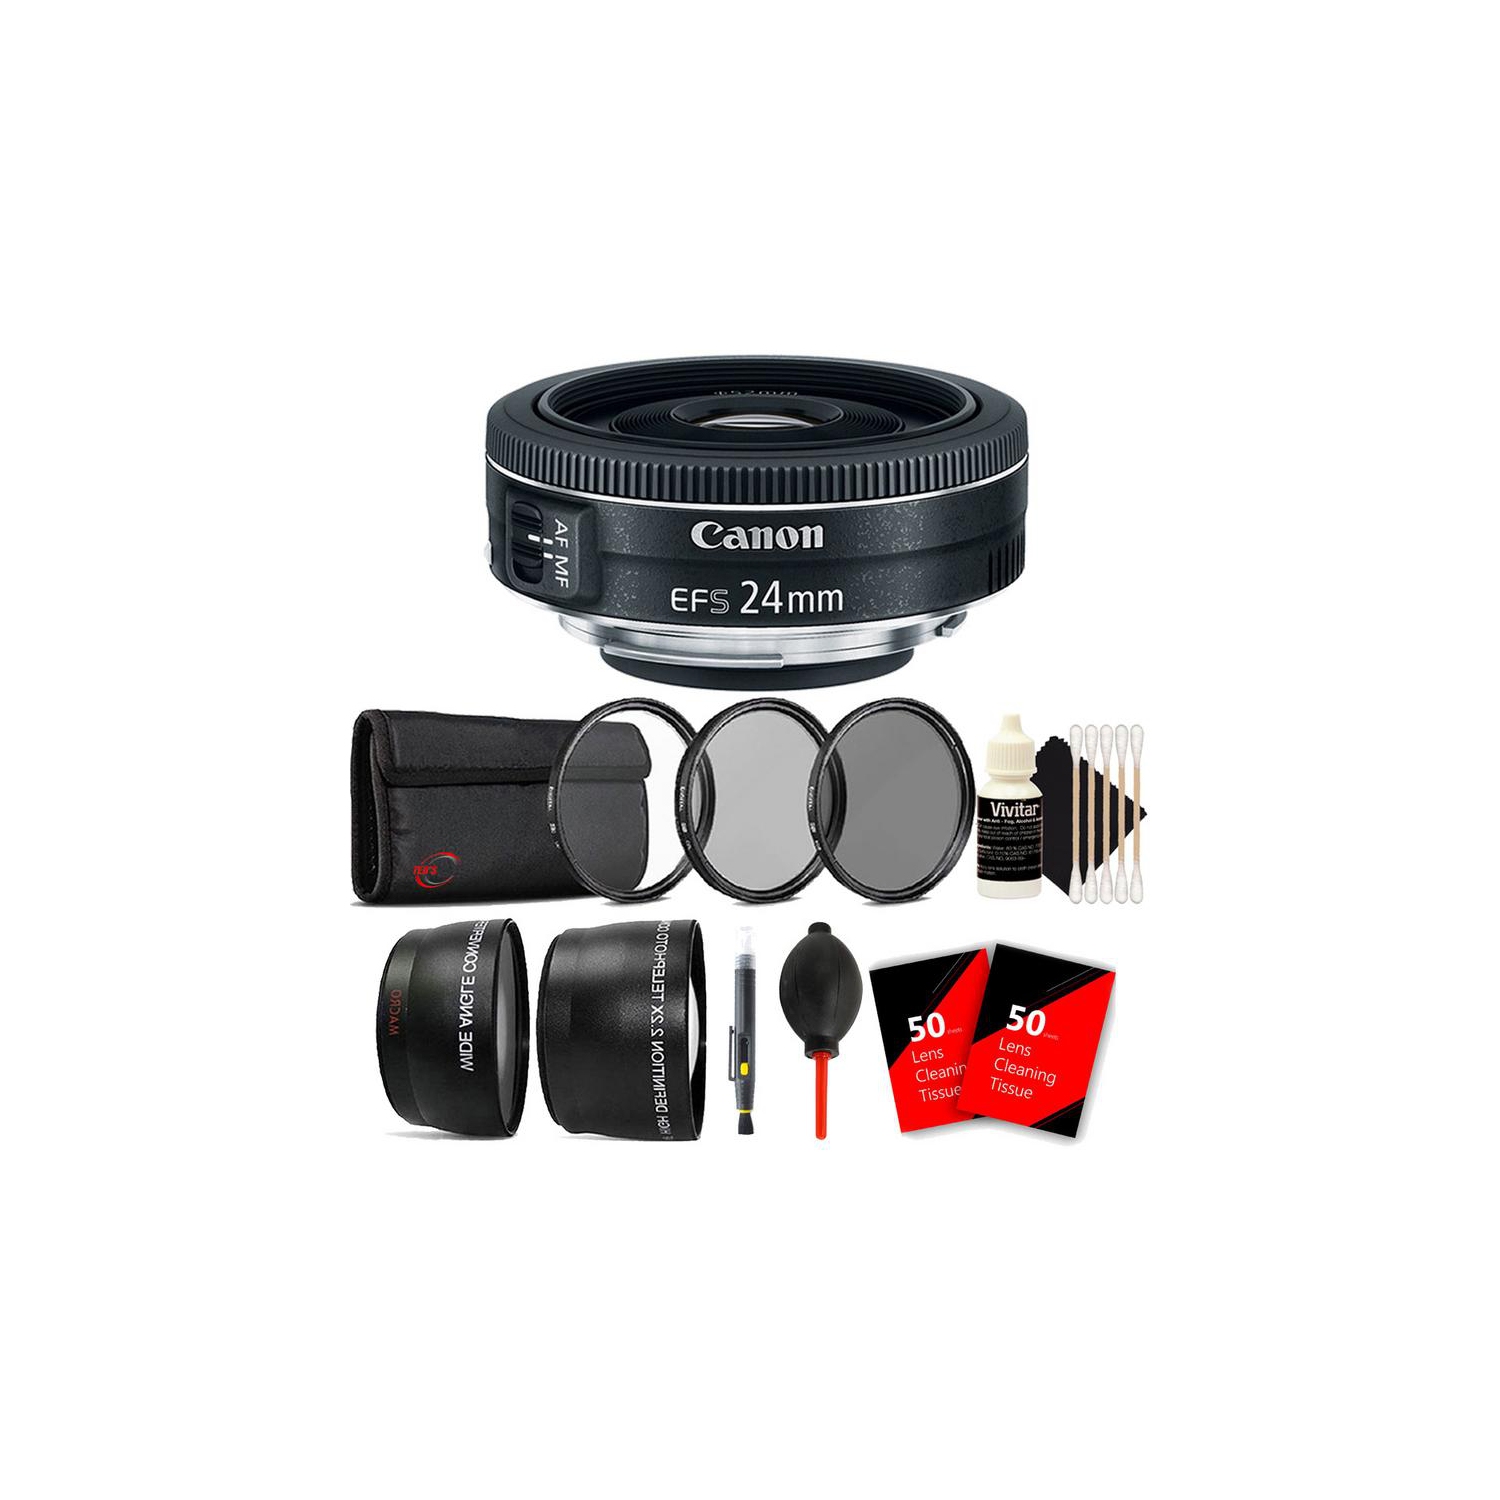 Canon EF-S 24mm f/2.8 STM Lens with Accessories For Canon 80D, 77D and 70D International Version w/Seller Warranty